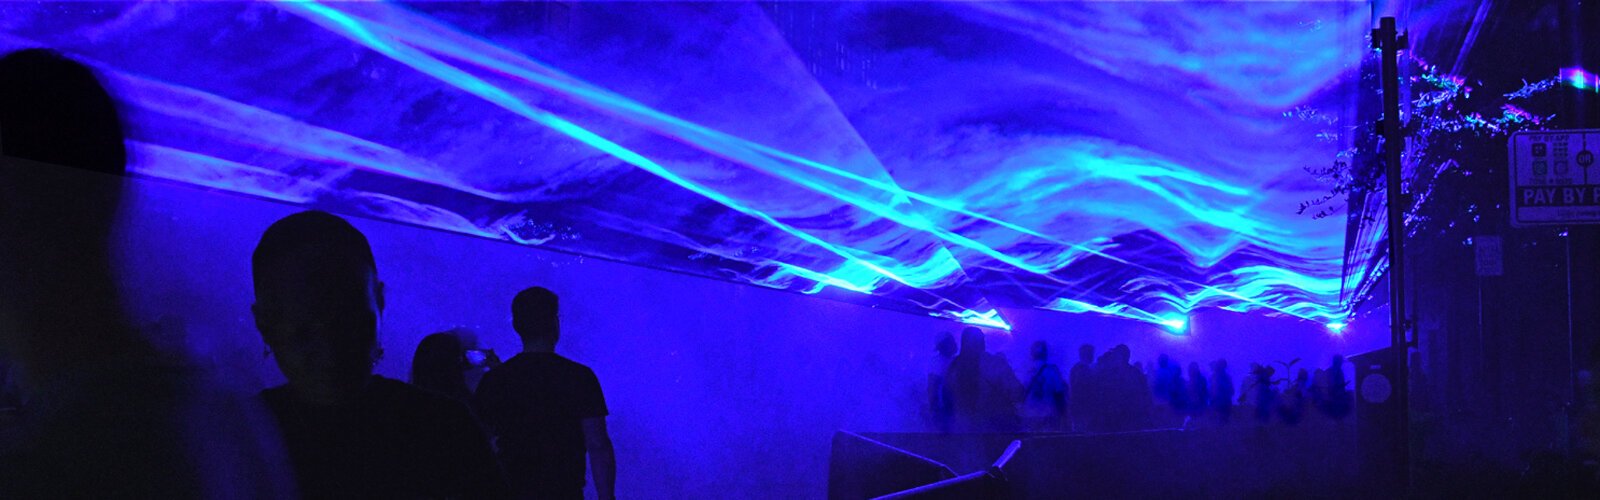 The one-of-a-kind immersive art experience WATERLICHT mesmerized the thousands who took part in it over the three-night period at Water Street Tampa.